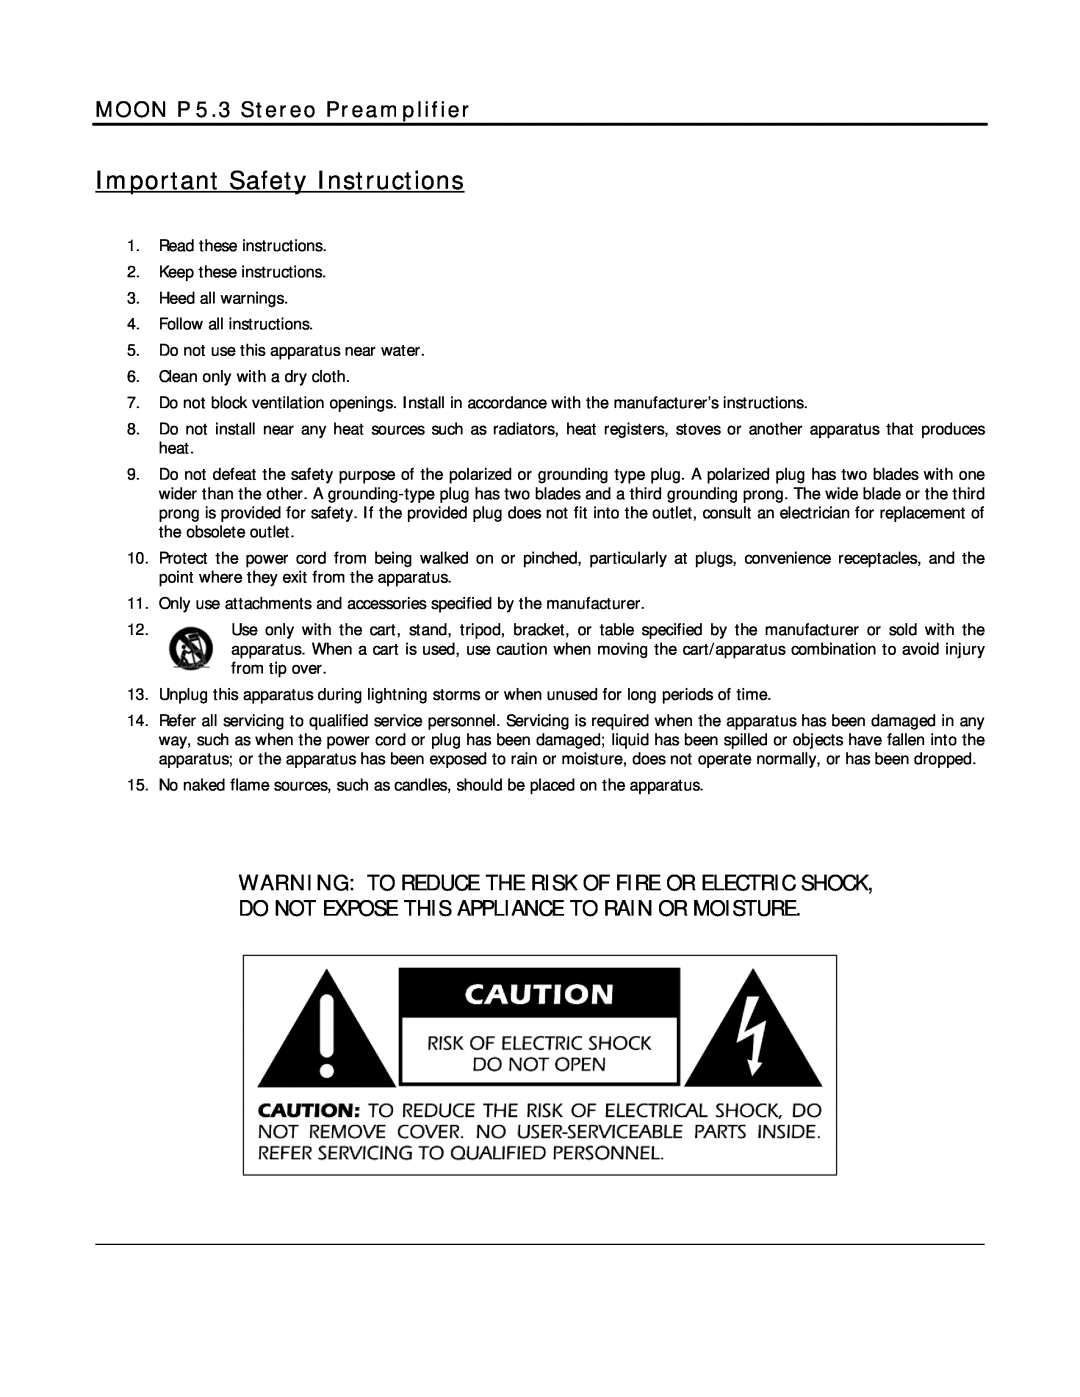 Simaudio owner manual Important Safety Instructions, MOON P 5.3 Stereo Preamplifier 